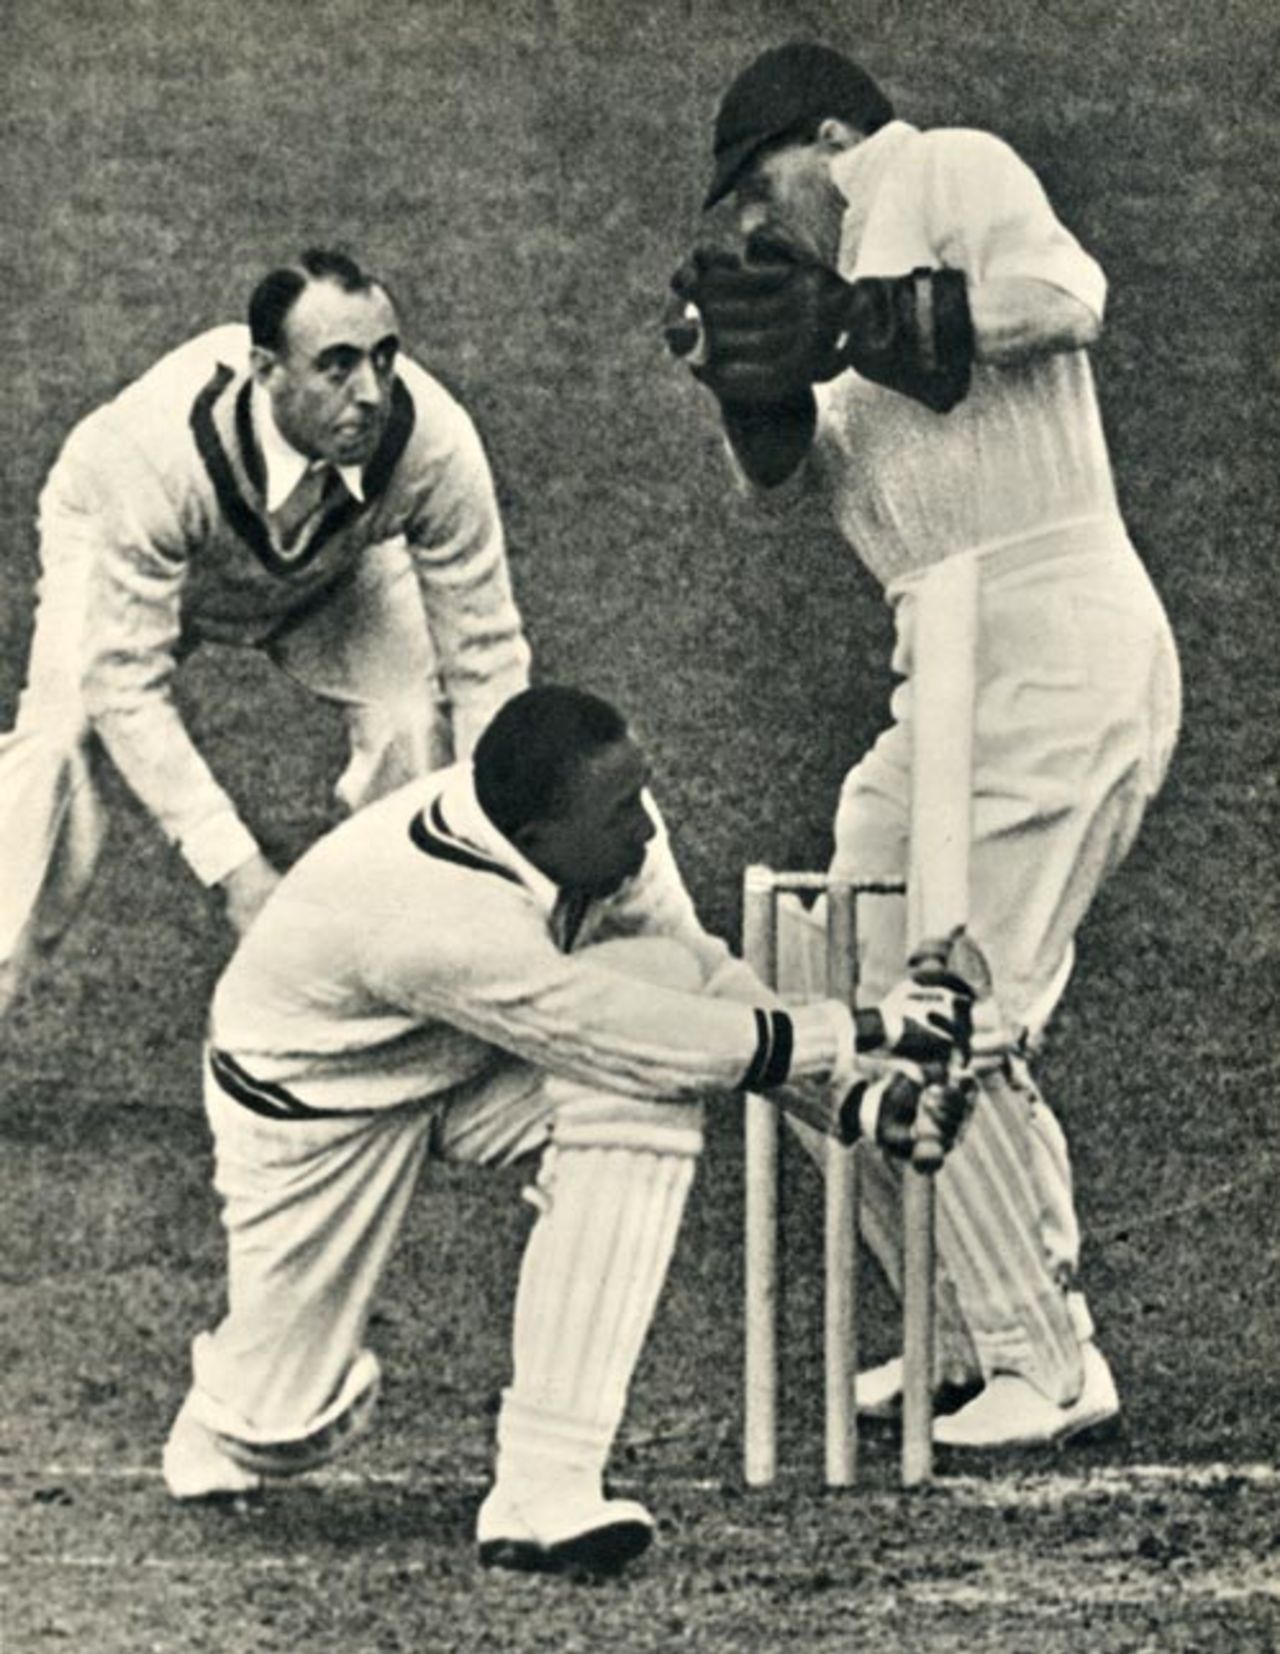 Learie Constantine batting in 1928